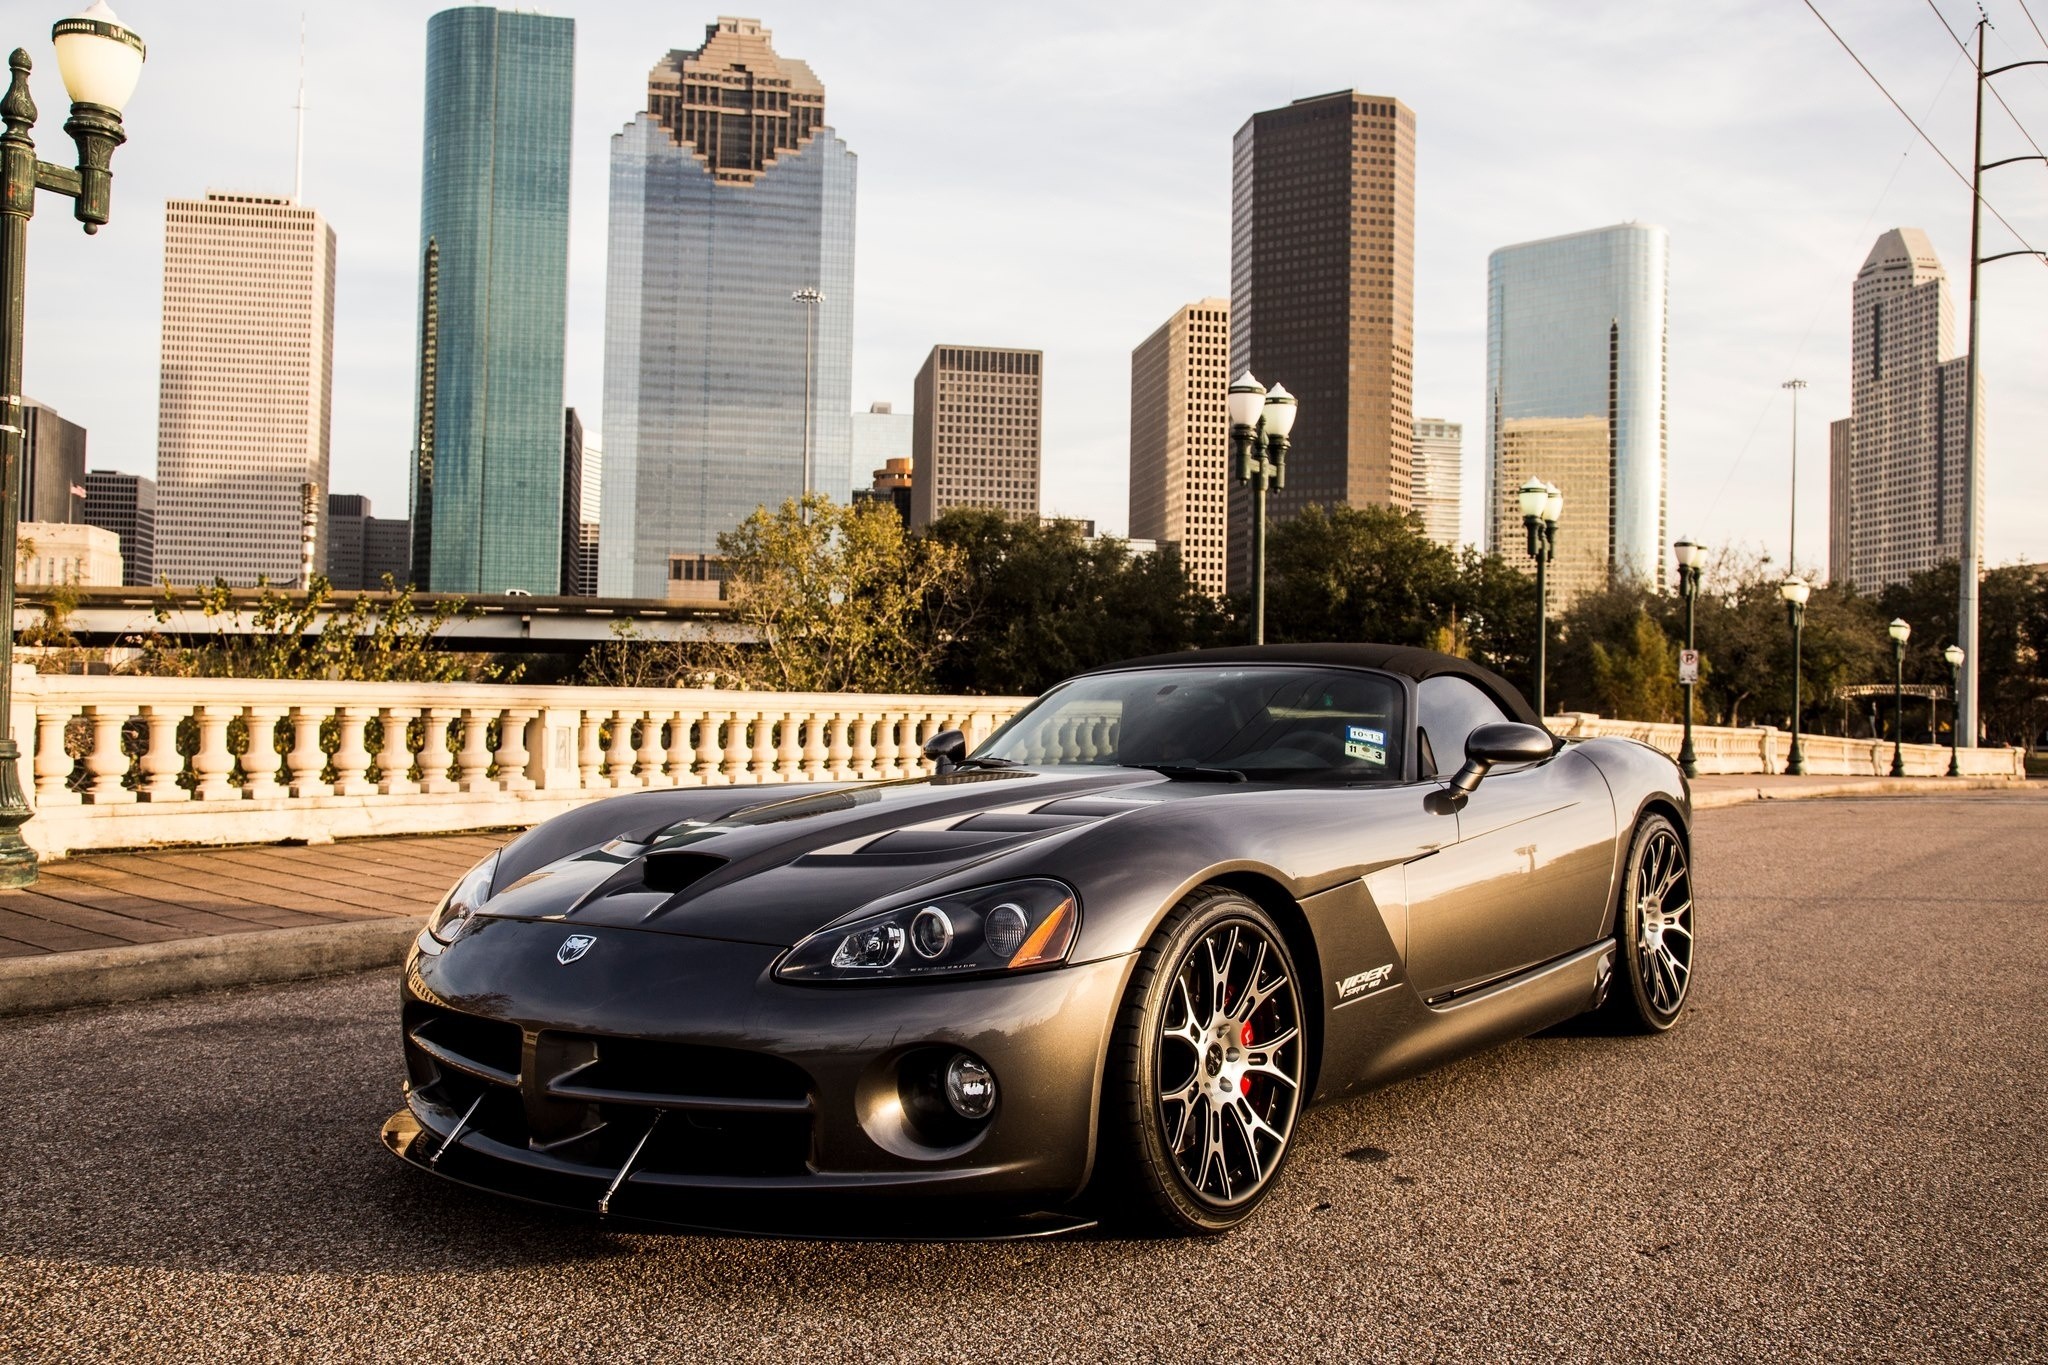 154422 download wallpaper auto, cars, city, dodge, viper screensavers and pictures for free